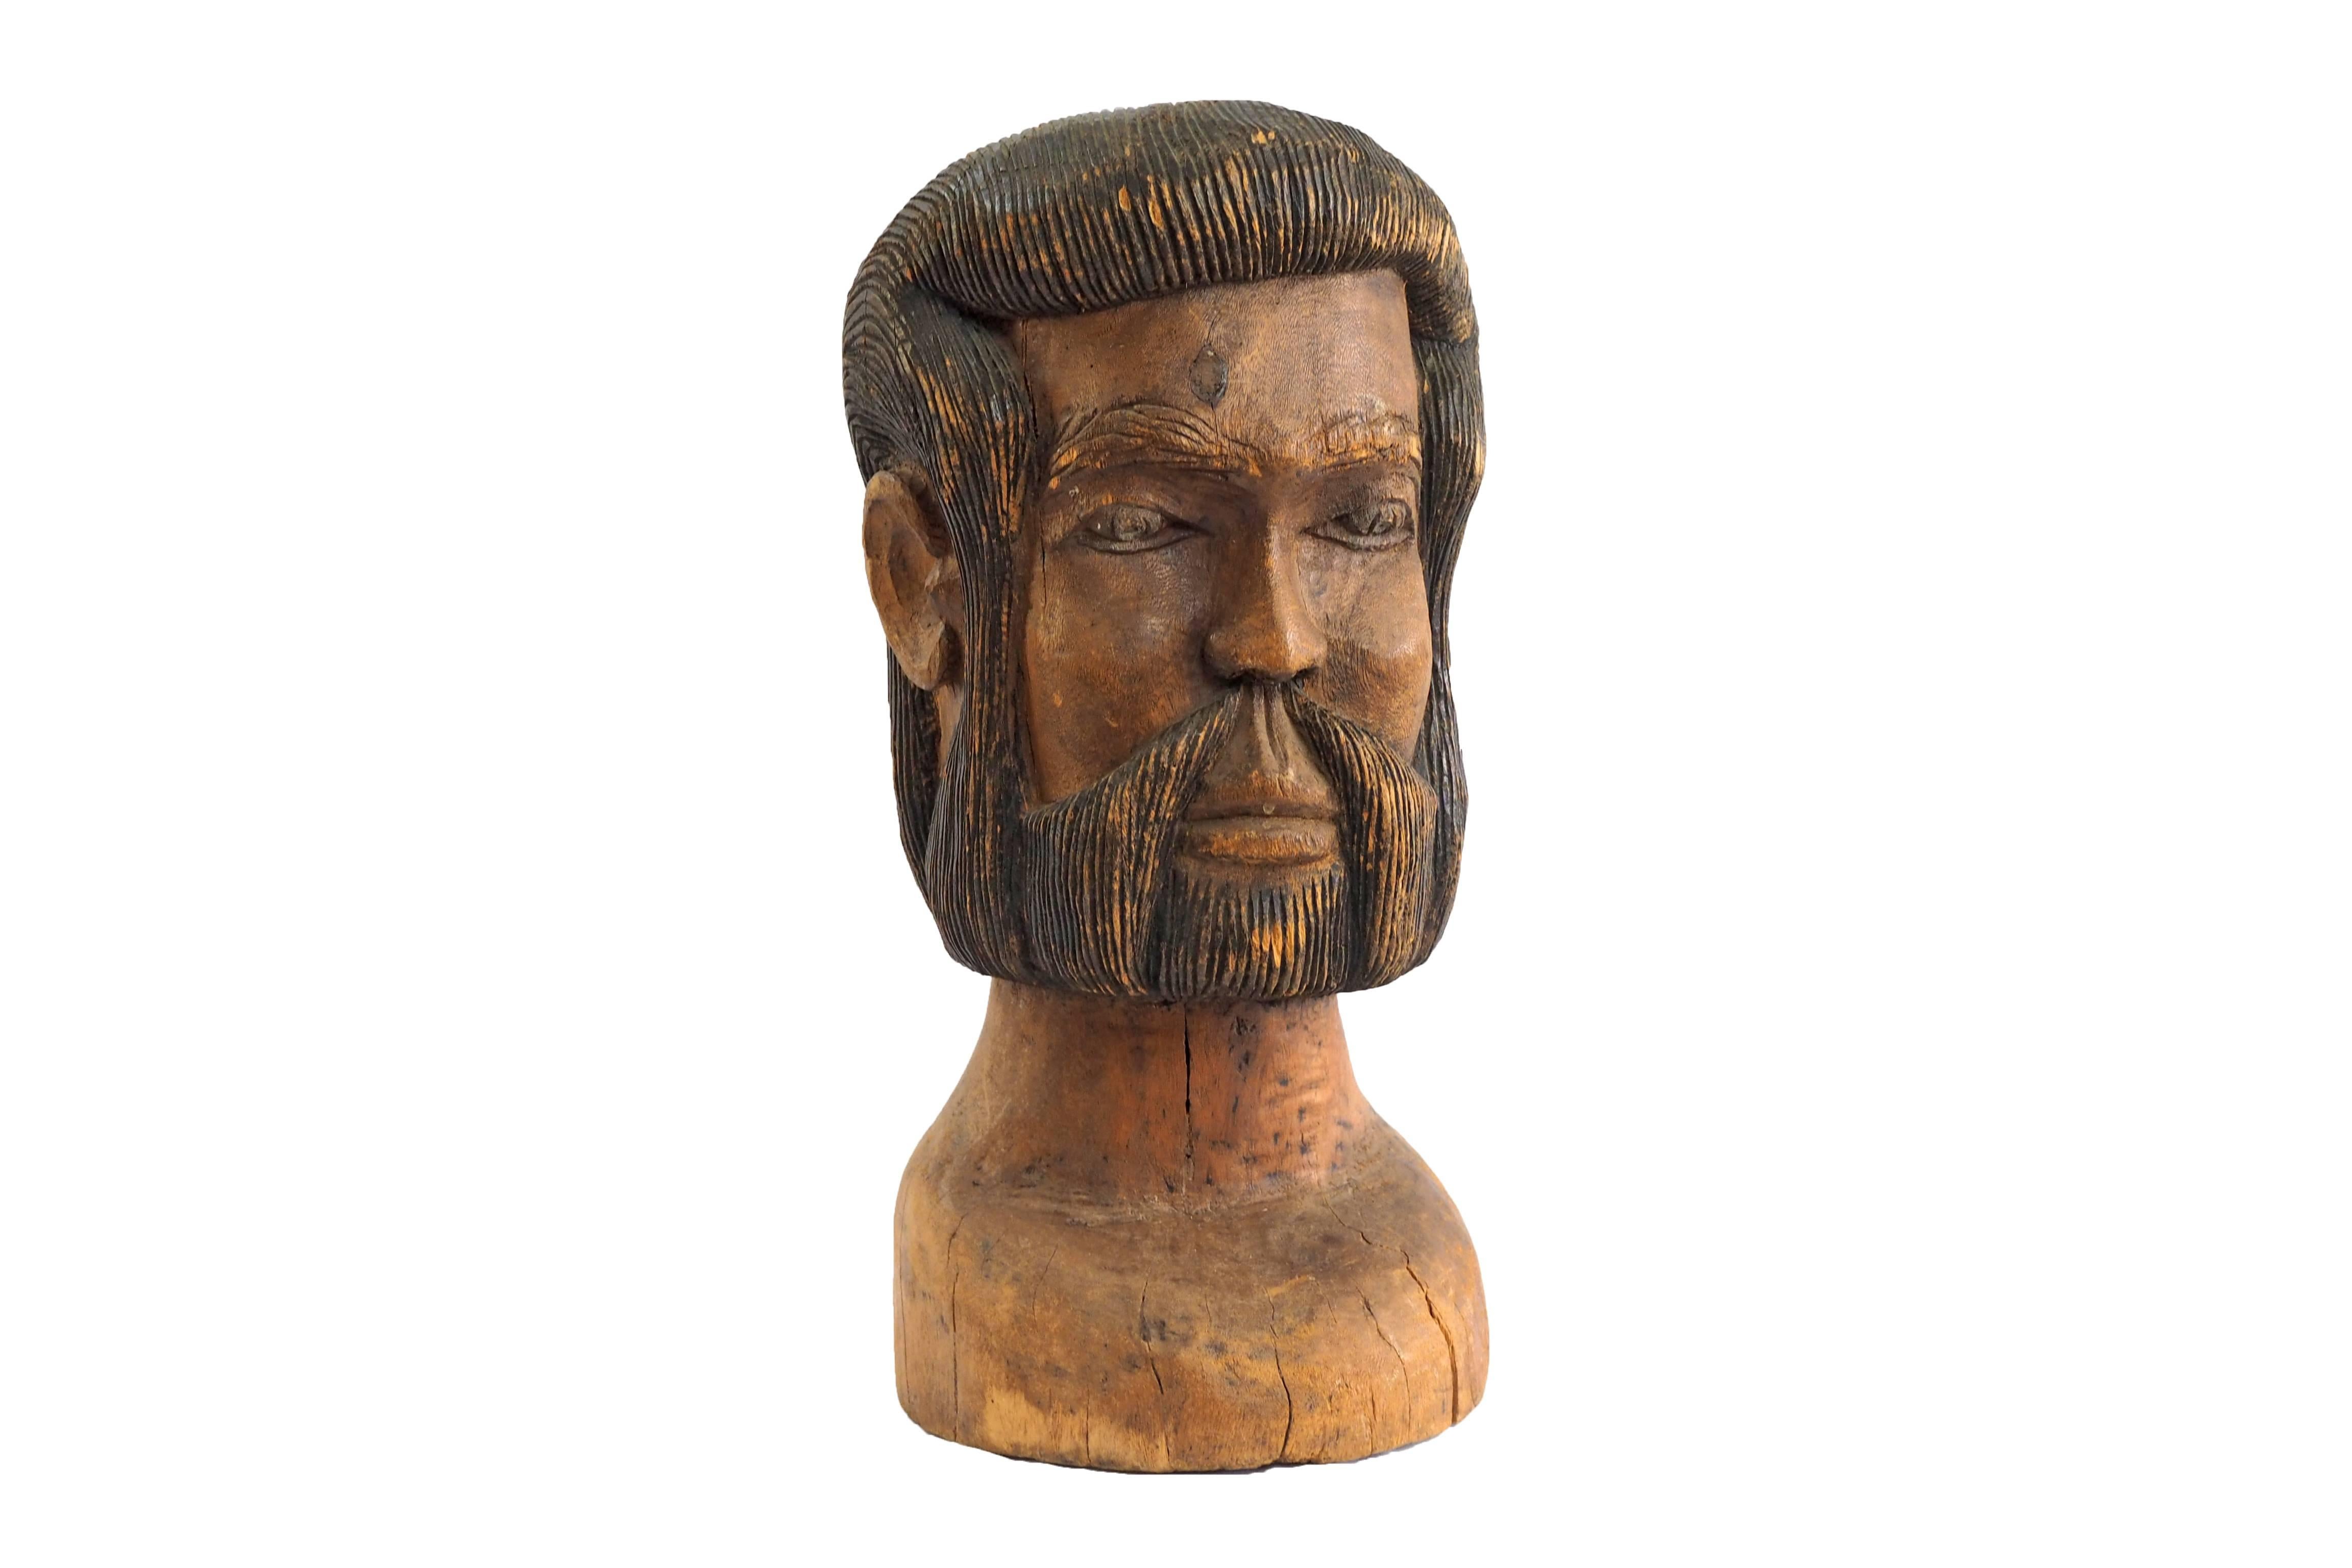 Hand-carved Folk Art solid wood bust. Beautiful and intricate technique with stunning level of detail.